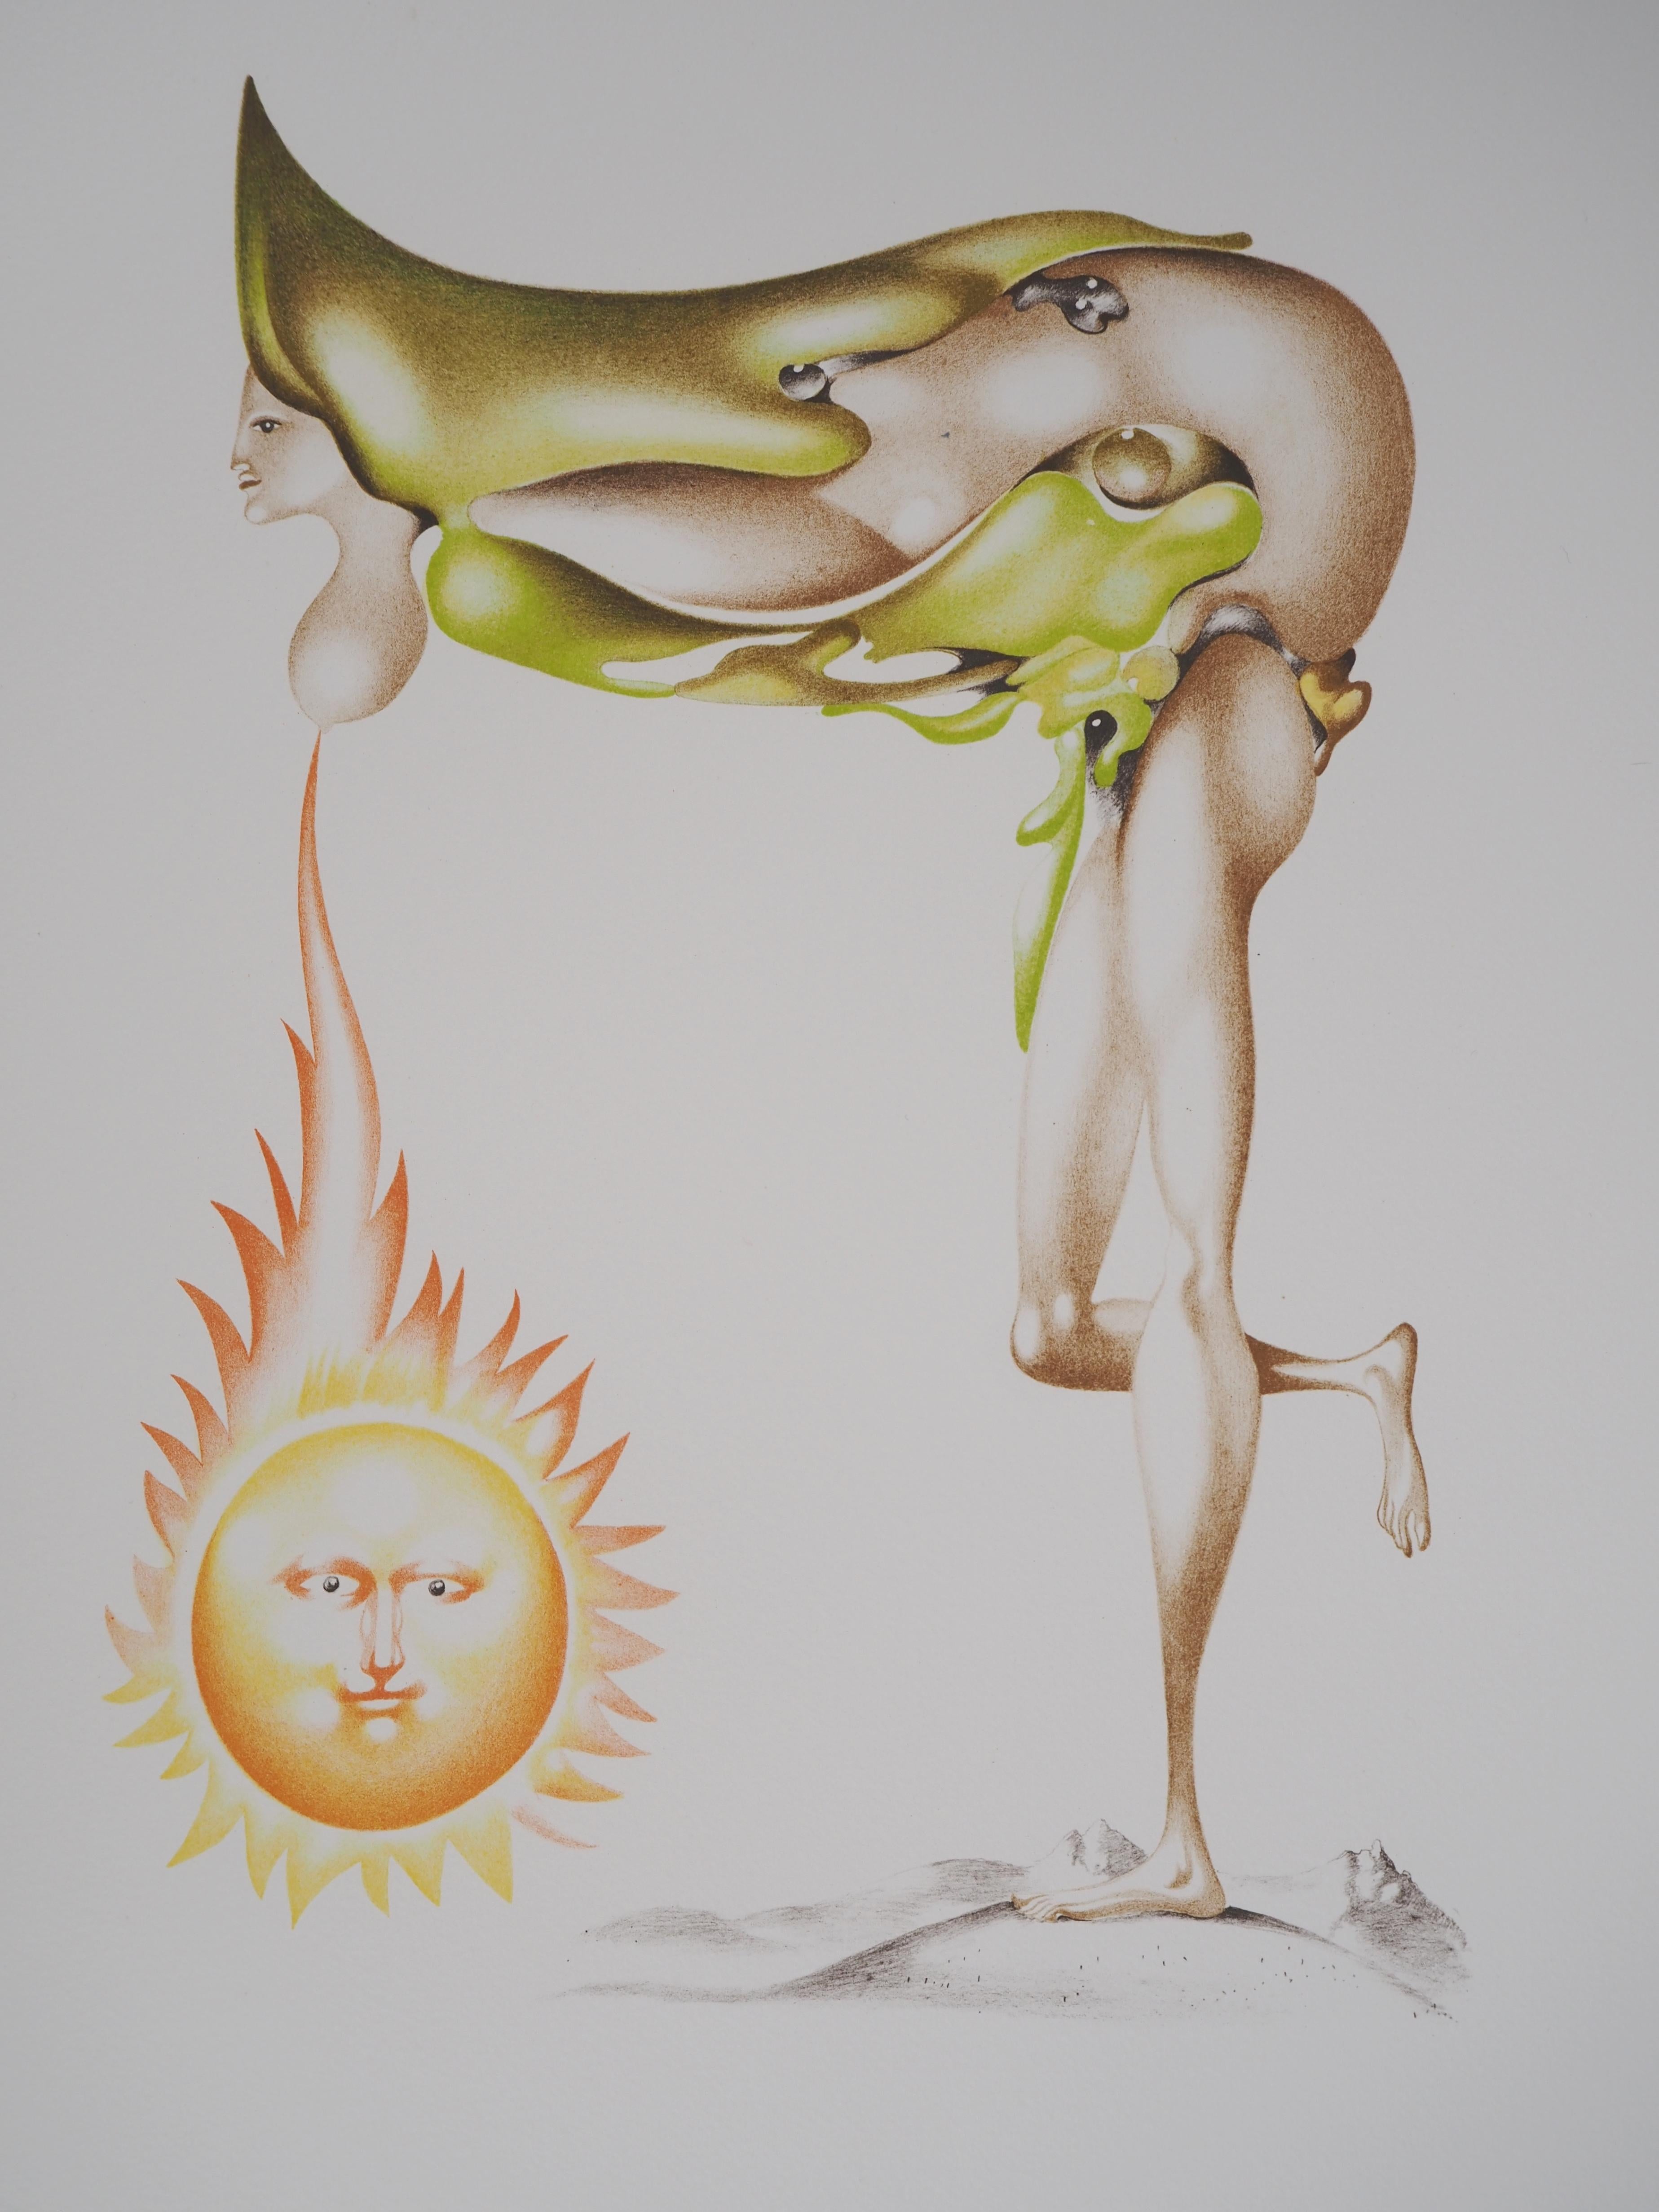 Woman and Sun - Original lithograph, Signed - Surrealist Print by Jules PERAHIM